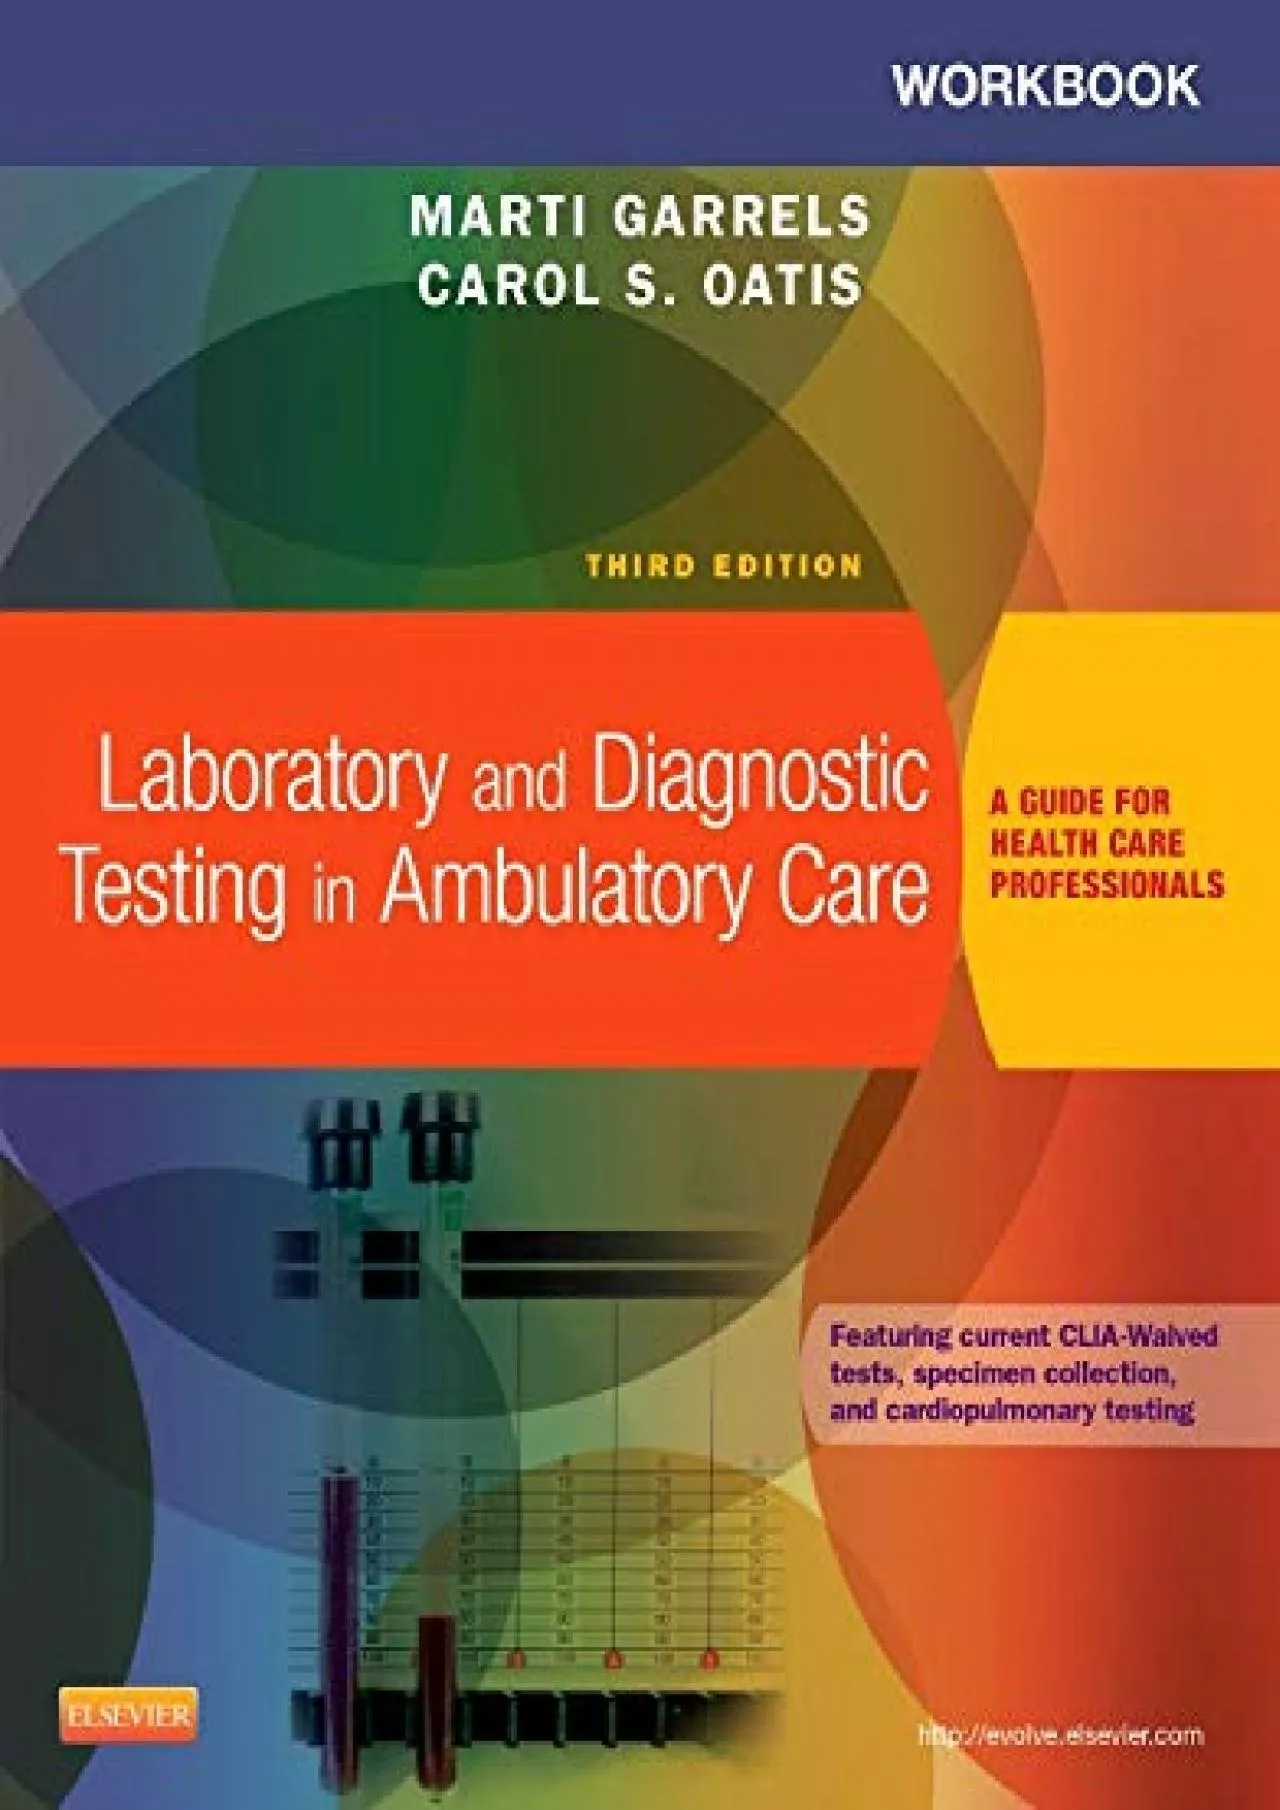 (DOWNLOAD)-Workbook for Laboratory and Diagnostic Testing in Ambulatory Care: A Guide